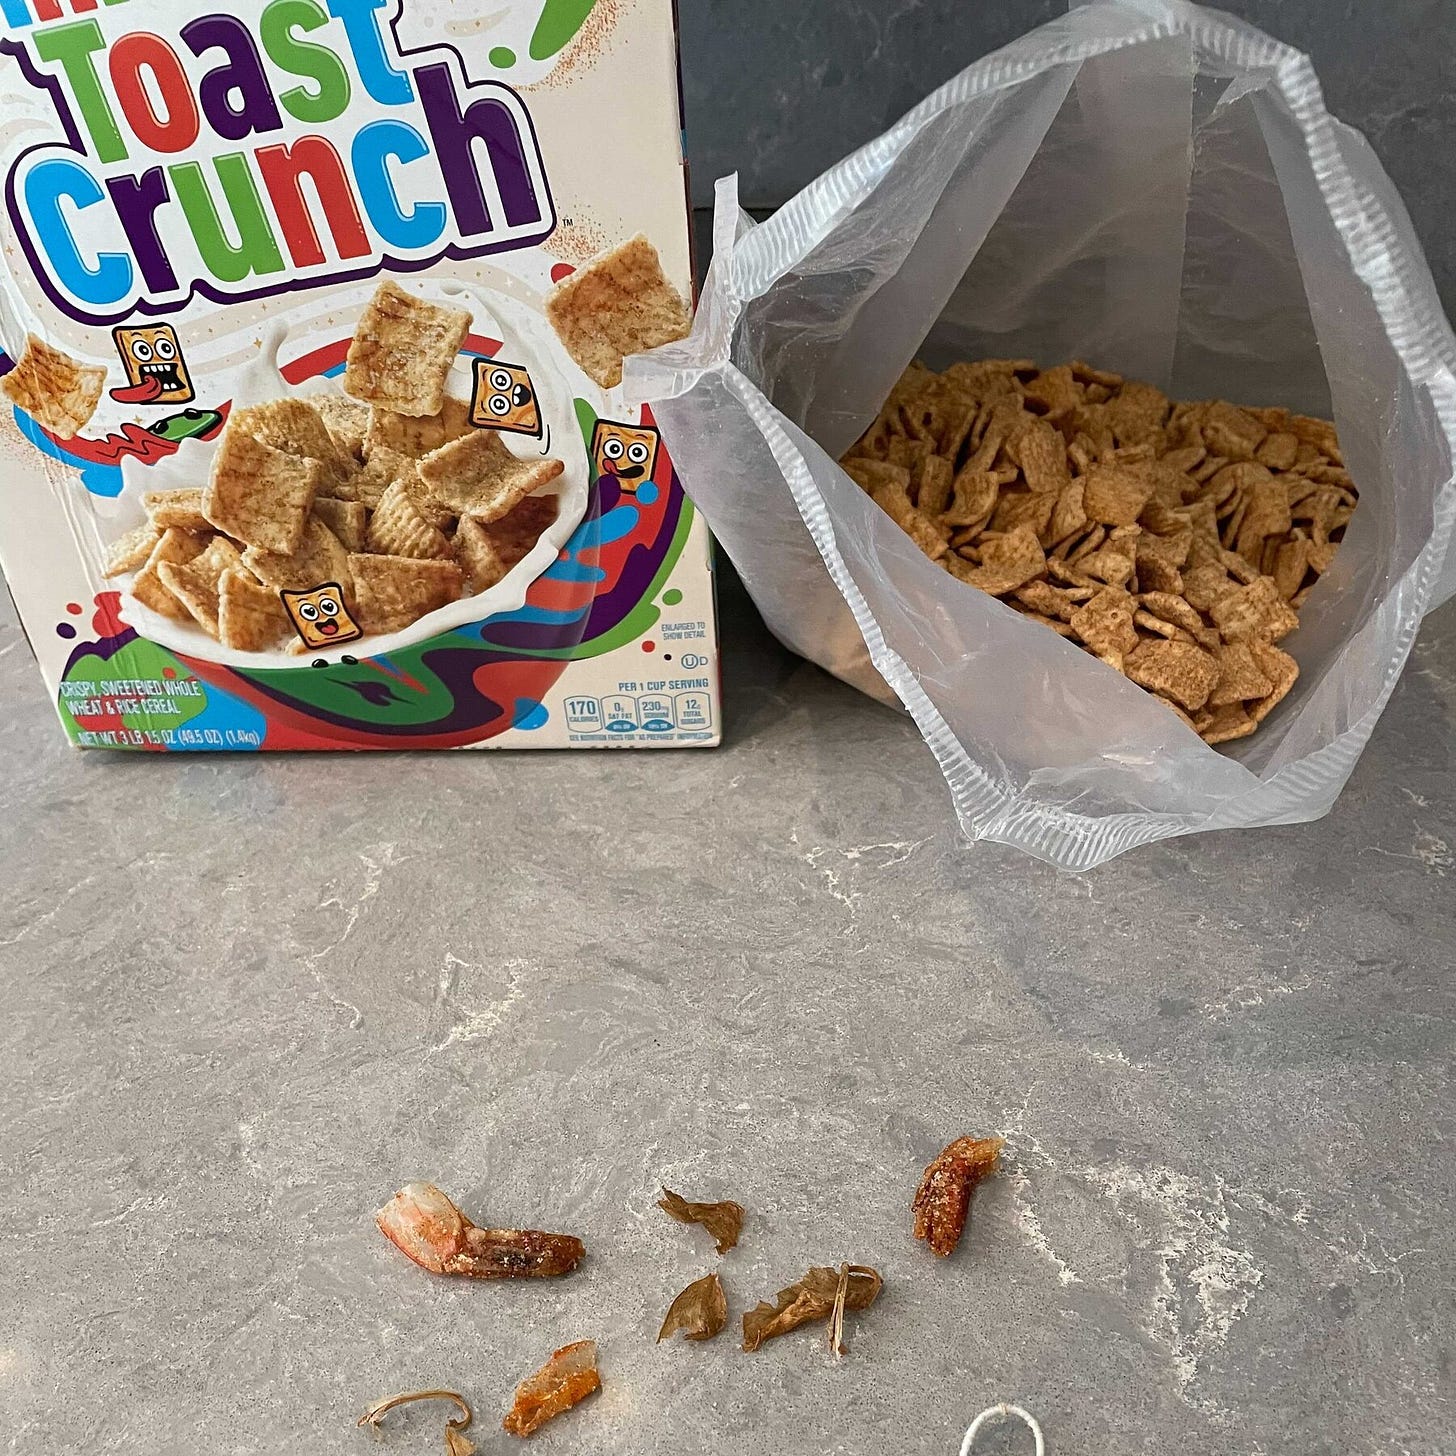 Man Says He Found Shrimp Tails in Cinnamon Toast Crunch - The New York Times